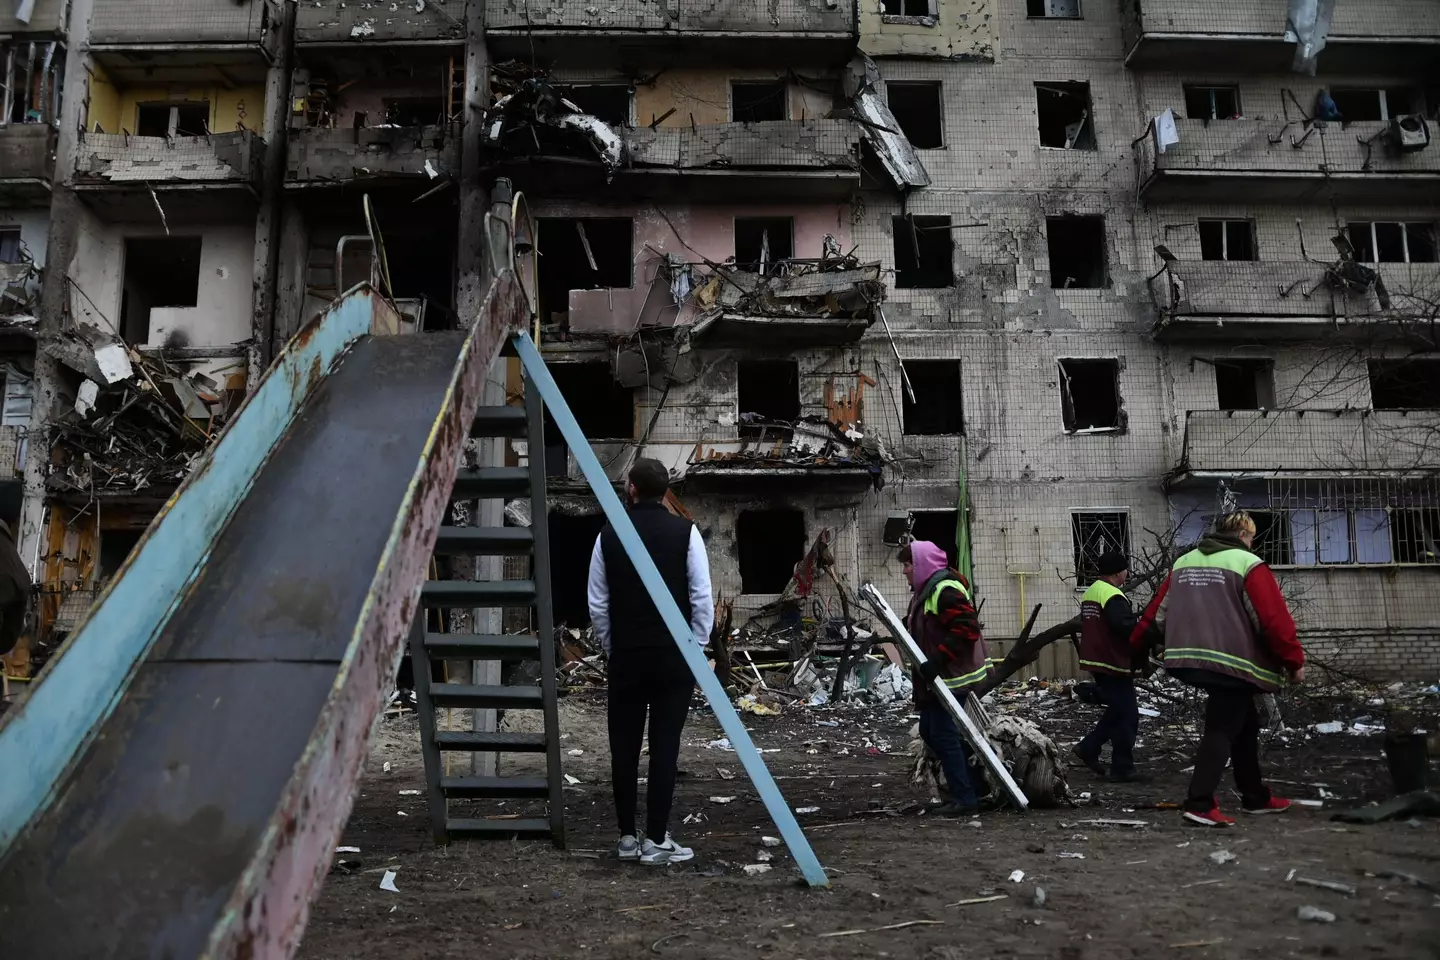 Damage at an apartment complex after a rocket attack in Kharkivskiy District, Kyiv.